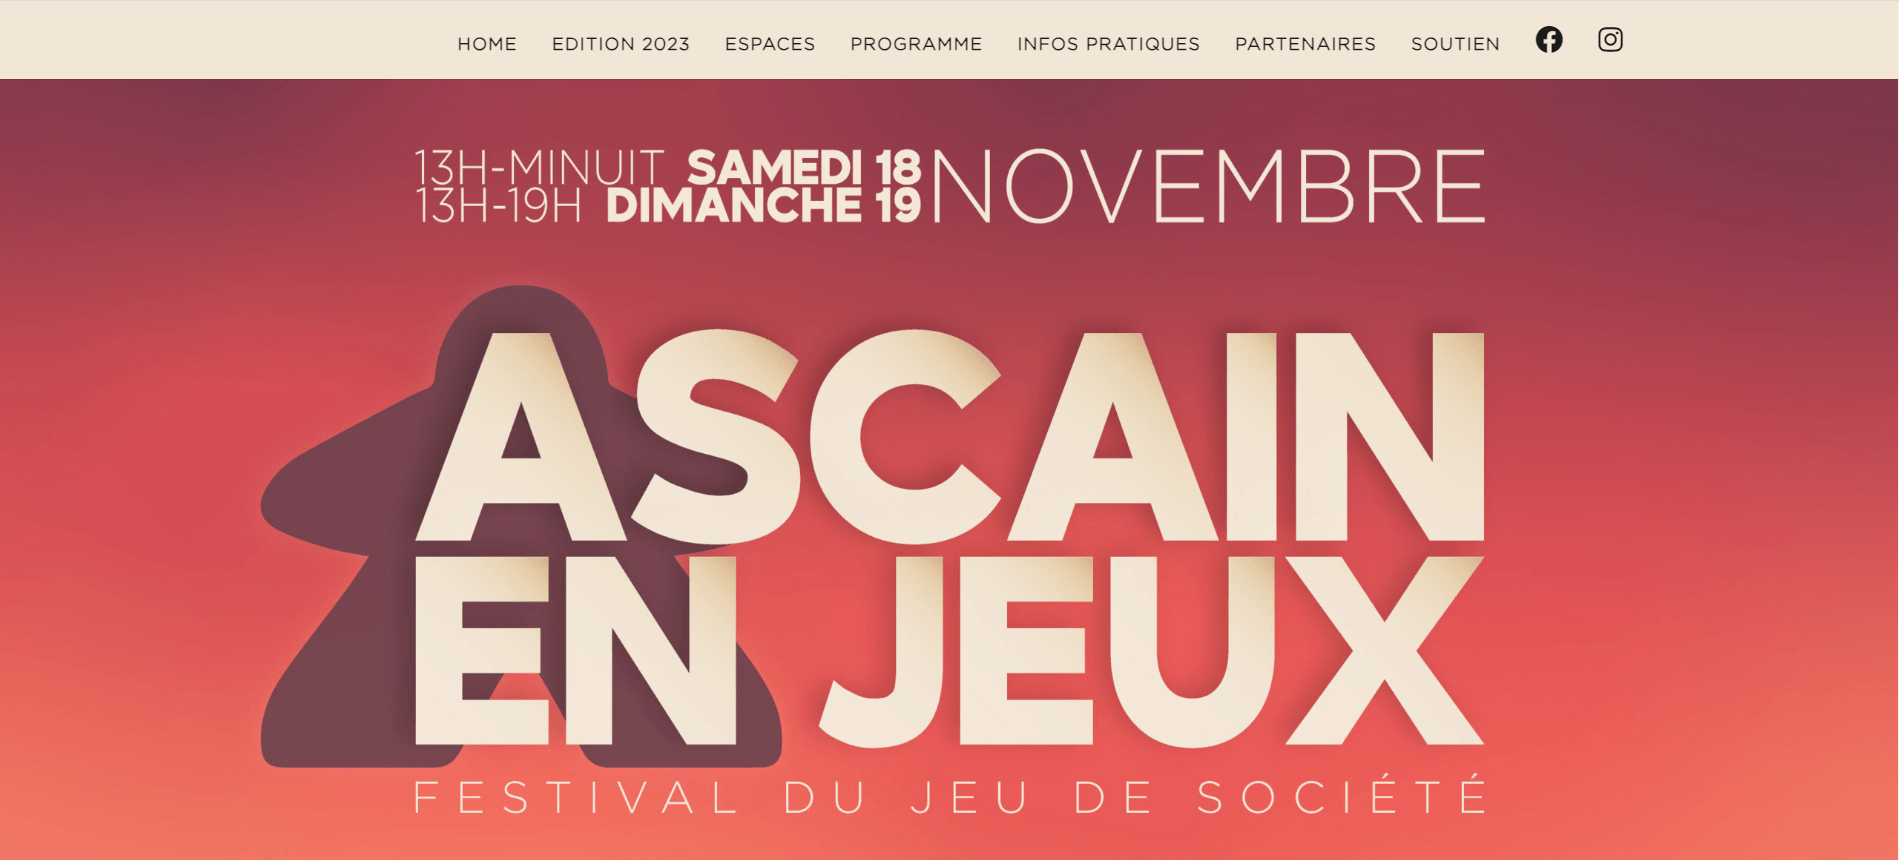 Ascain en jeux festival brings different generations together to play board games.